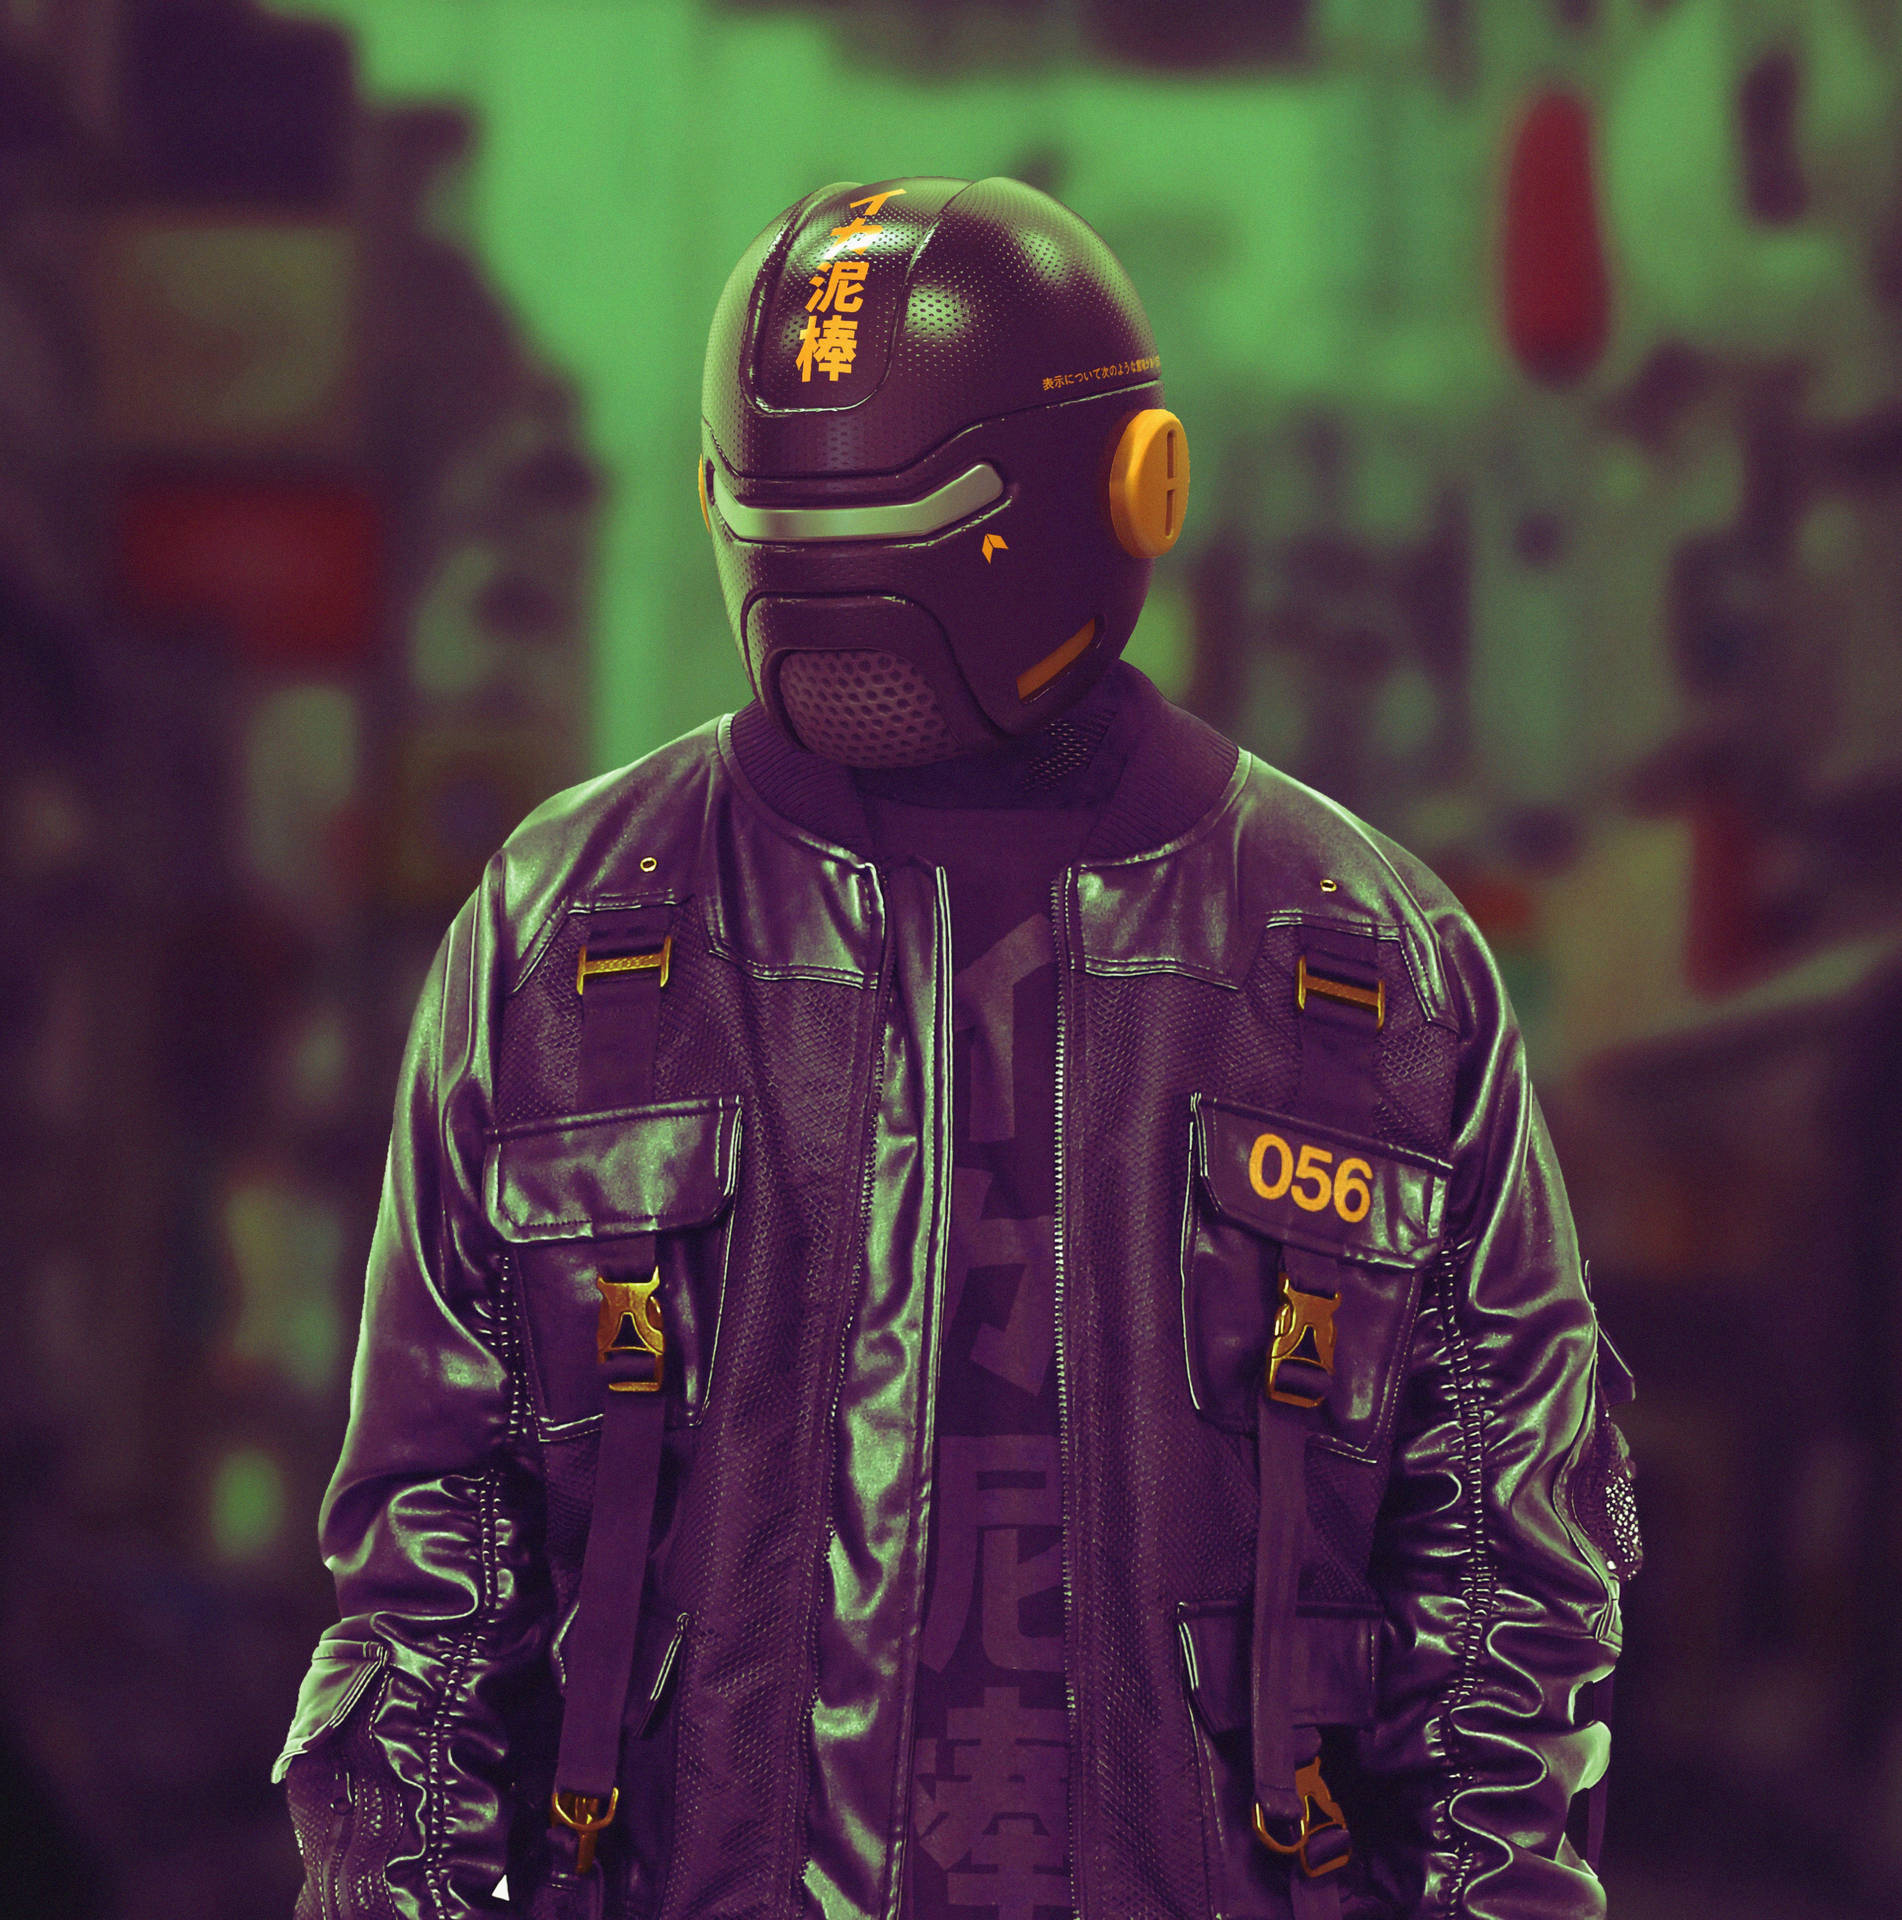 Welcome to the Cyberpunk World Wallpaper